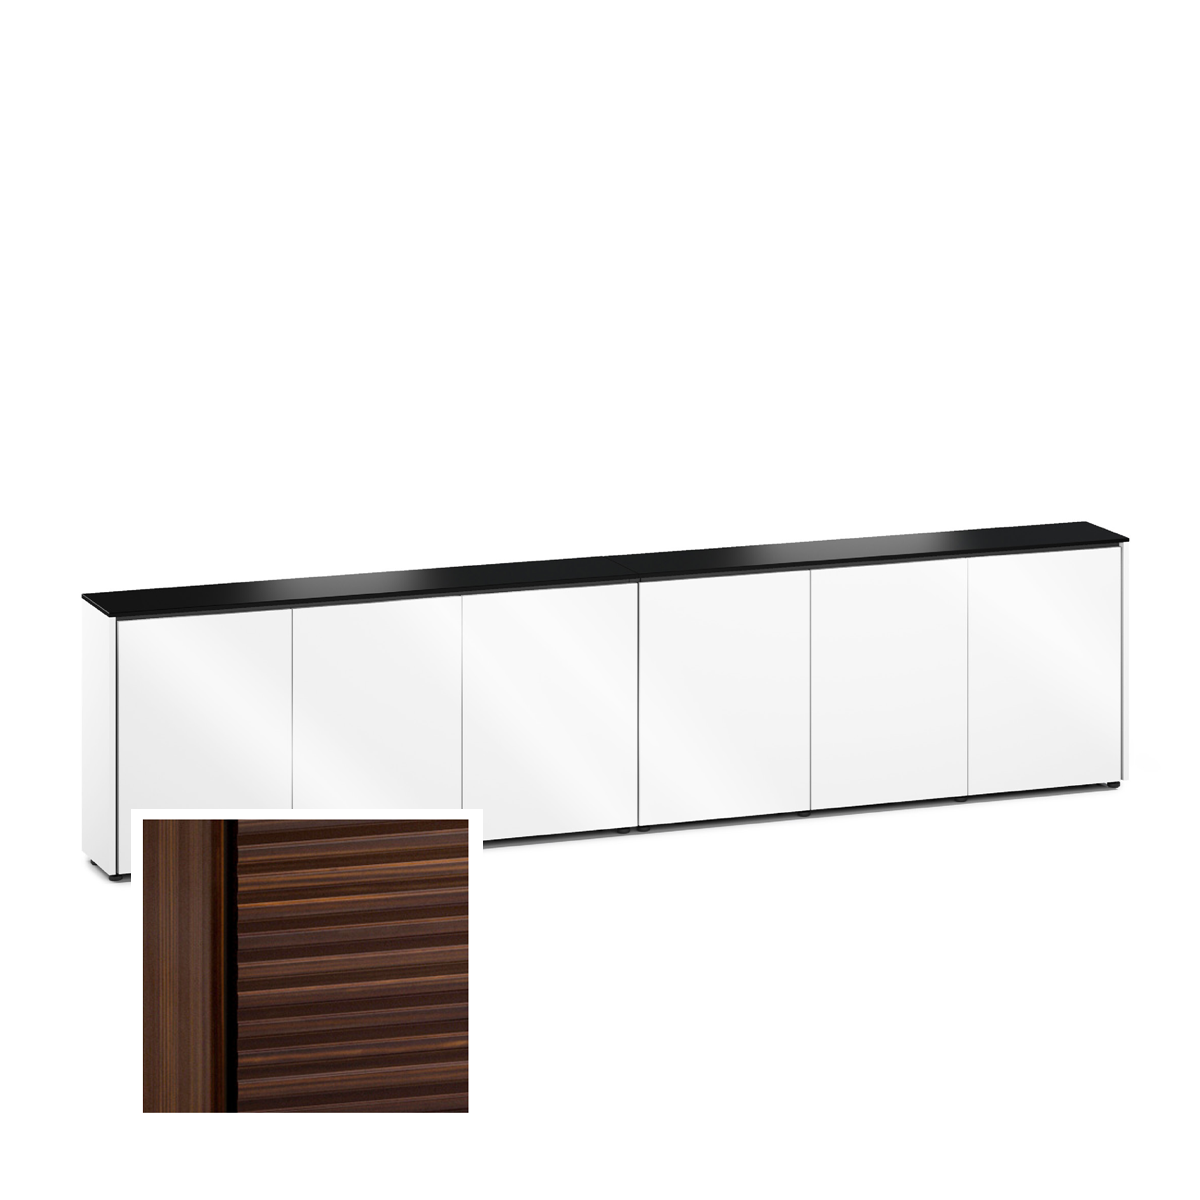 D1/367A/ZU/OB 6 Bay Low-Profile, Wall Cabinet, Zurich/Linear Texture- Opium Brown